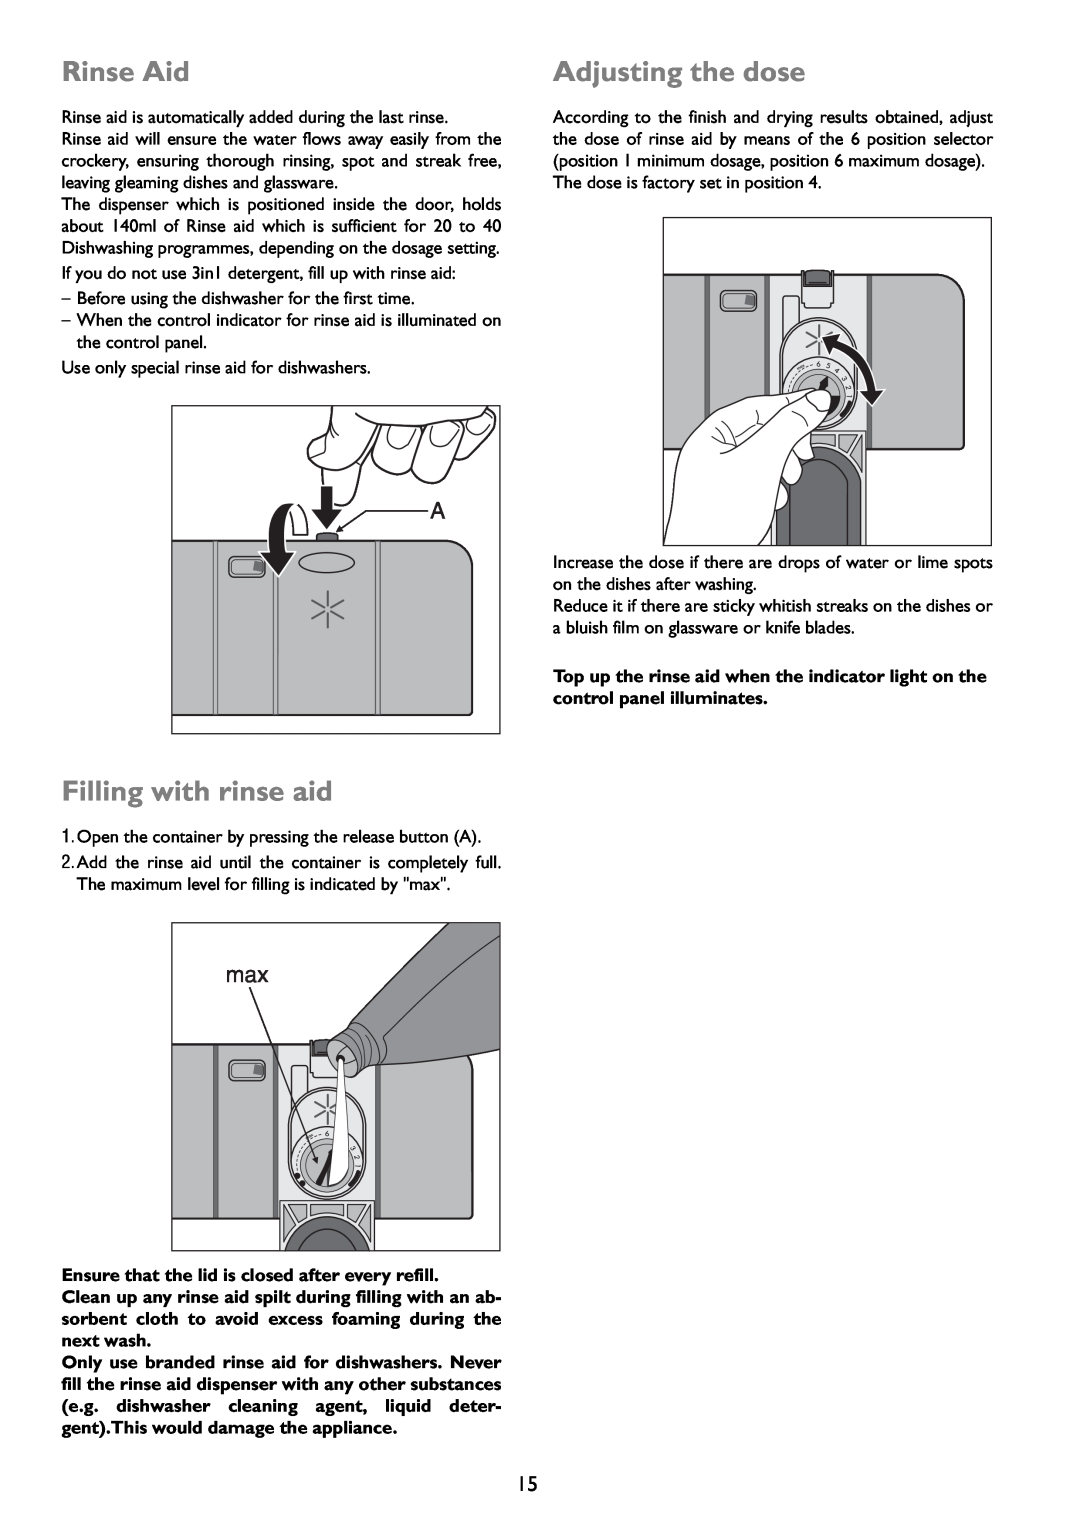 John Lewis JLDWW 1203 instruction manual Rinse Aid, Filling with rinse aid, Adjusting the dose 